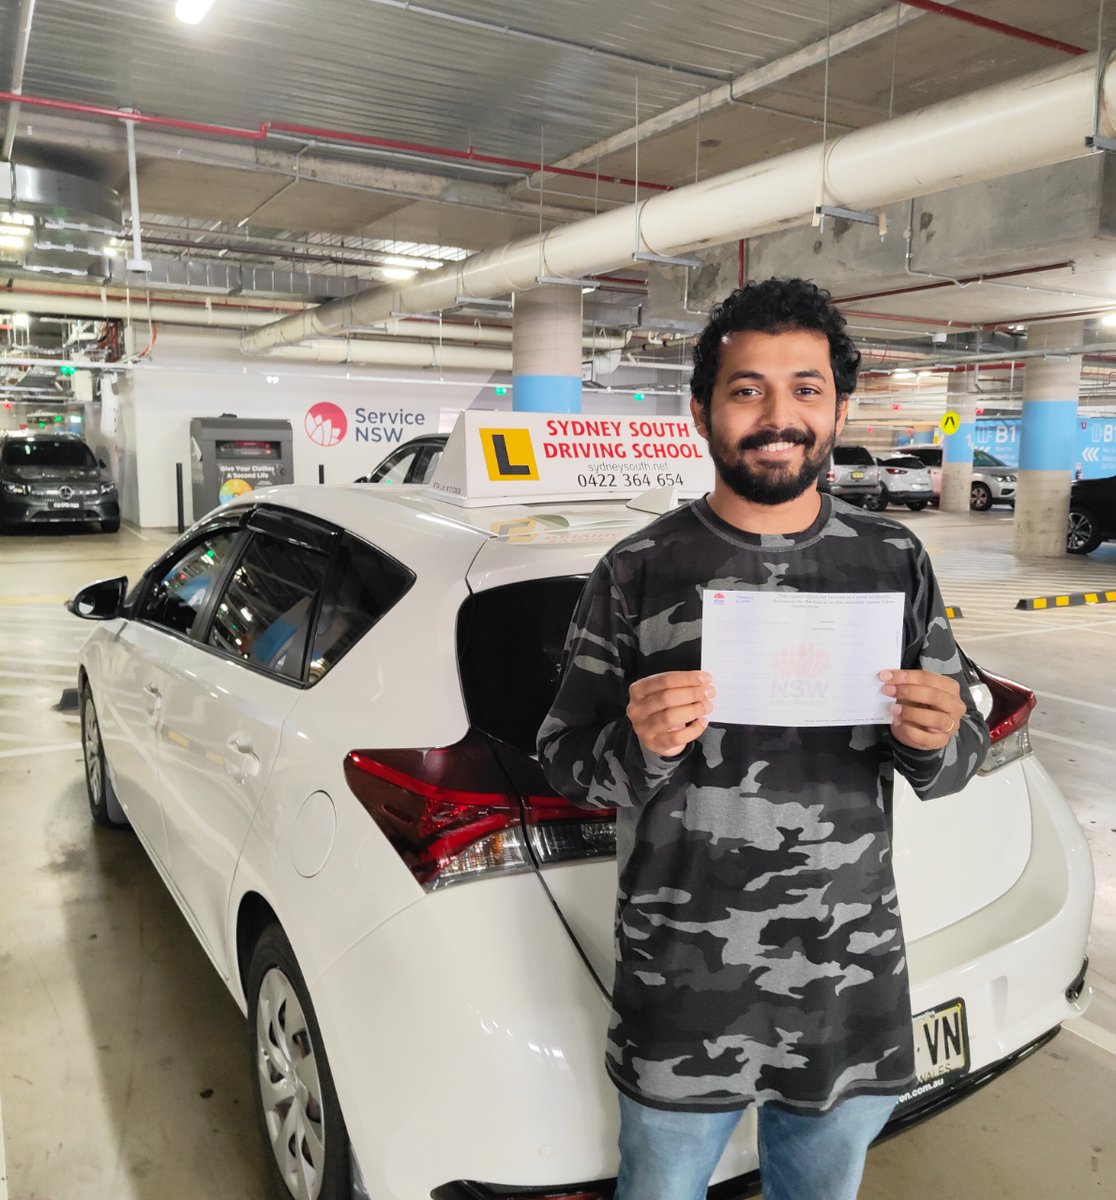 🎉 Big congrats to Sharath for acing his NSW driver's test at Edmondson Park and converting his overseas license to an NSW one! 🚗✨ #NewDriver #NSWLicense #DrivingTestSuccess #Congratulations #DrivingJourney #EdmondsonPark #drivinglessons #drivingschool #drivingtest